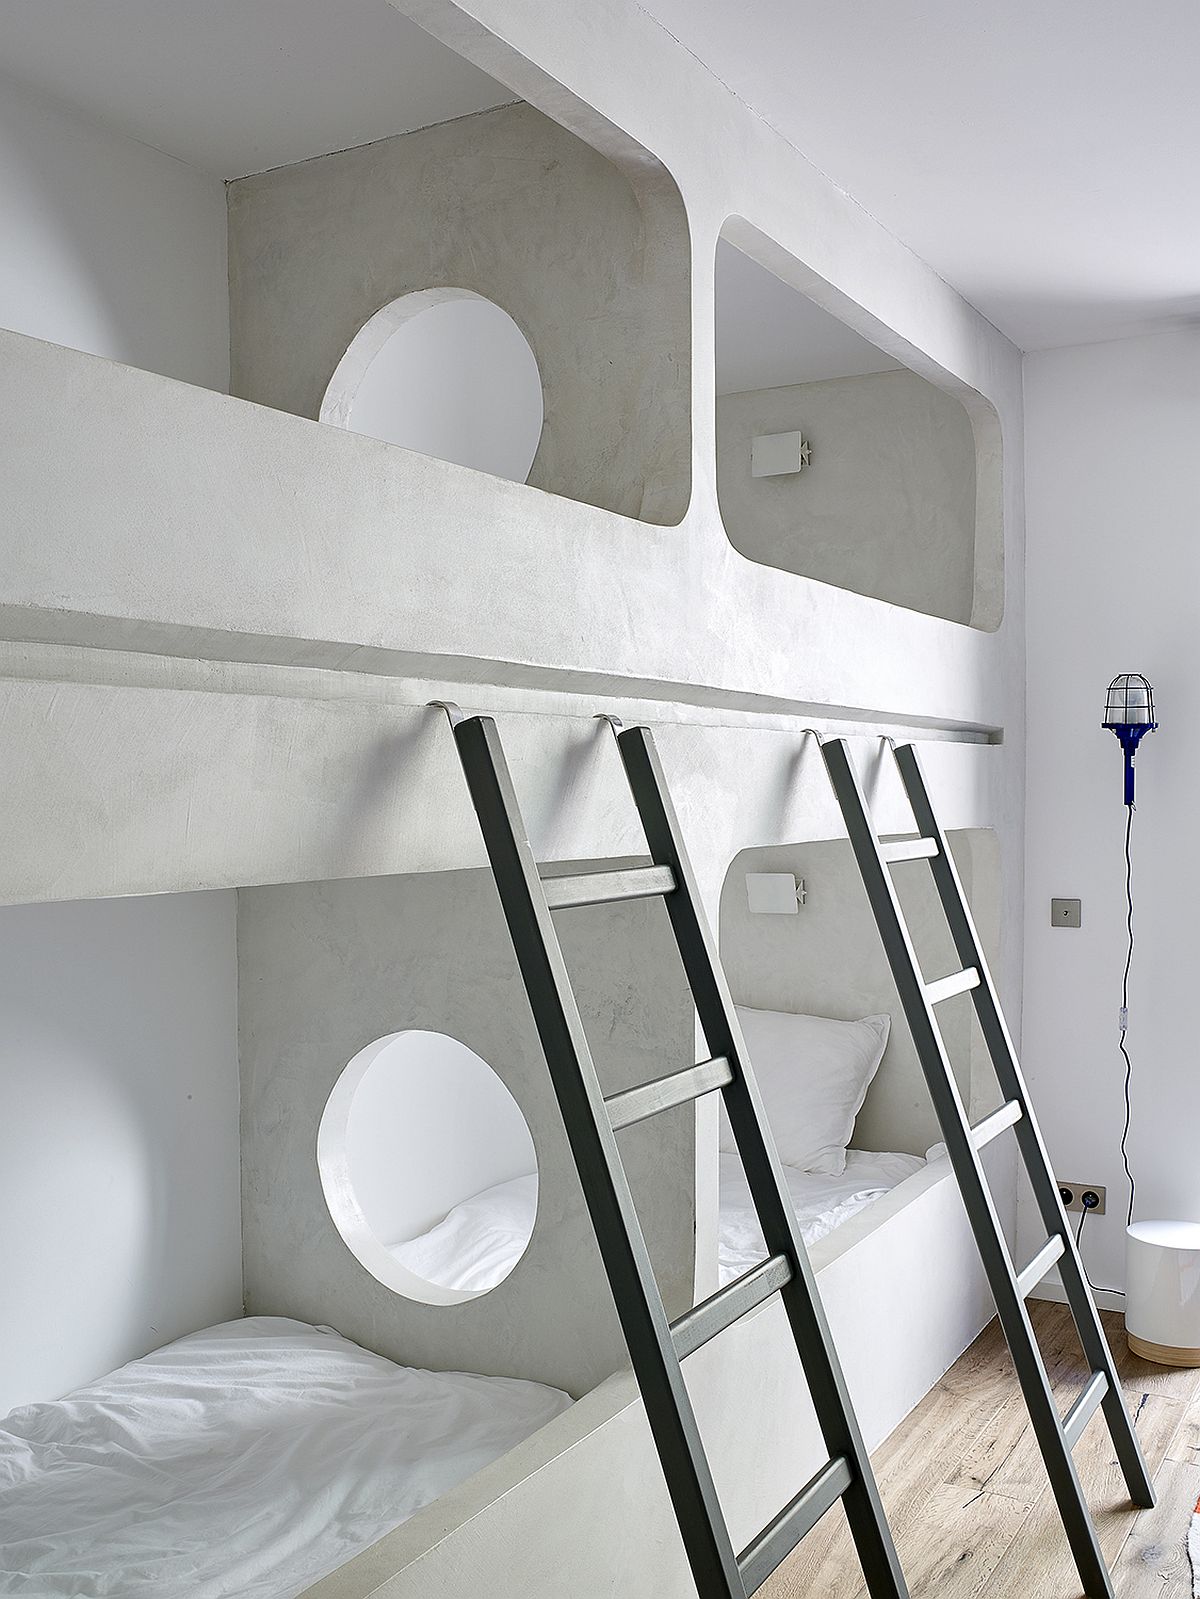 Bunk-beds-in-the-kids-room-with-ladder-that-feels-both-stylish-and-space-savvy-91475